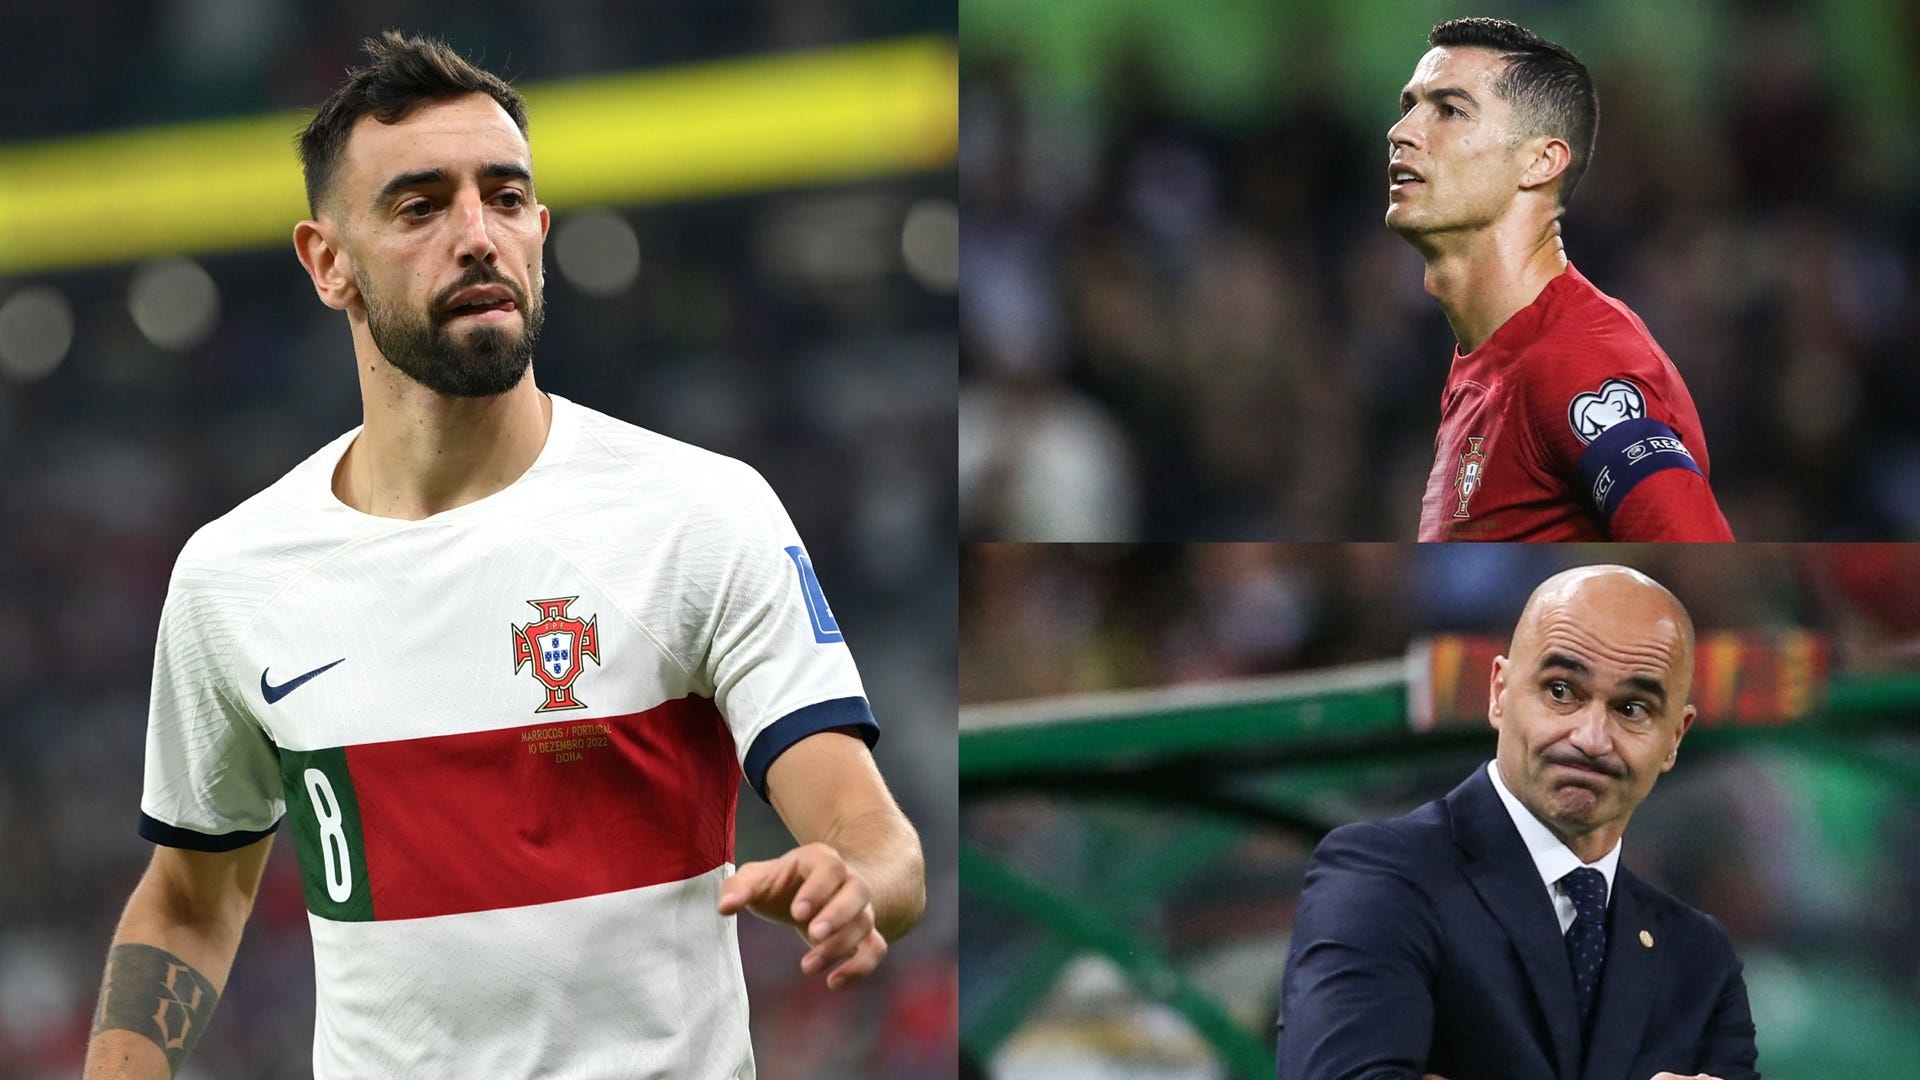 Bruno Fernandes RUBBISHES Cristiano Ronaldo's claim that new Portugal boss Roberto Martinez has been a 'breath of fresh air'